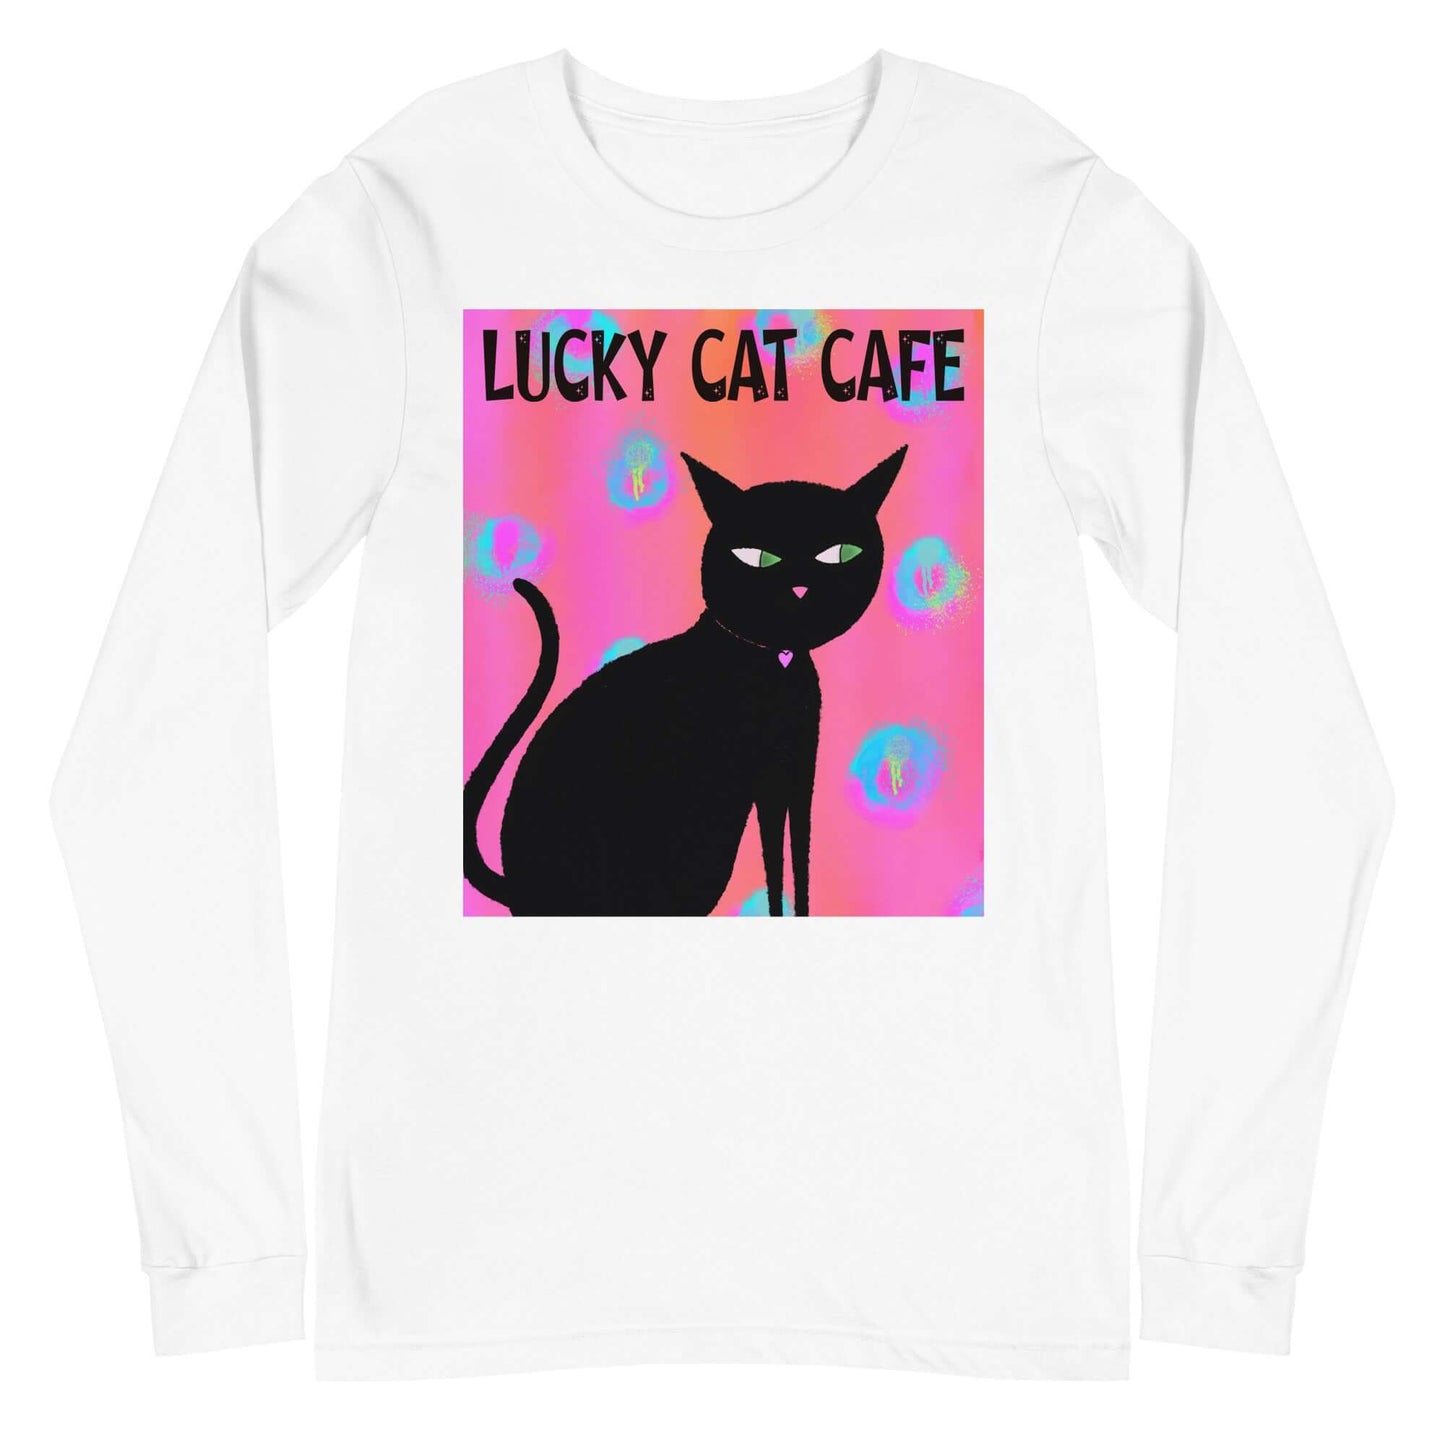 Black Cat on Hot Pink Tie Dye Background with Text “Lucky Cat Cafe” Unisex Long Sleeve Tee in White